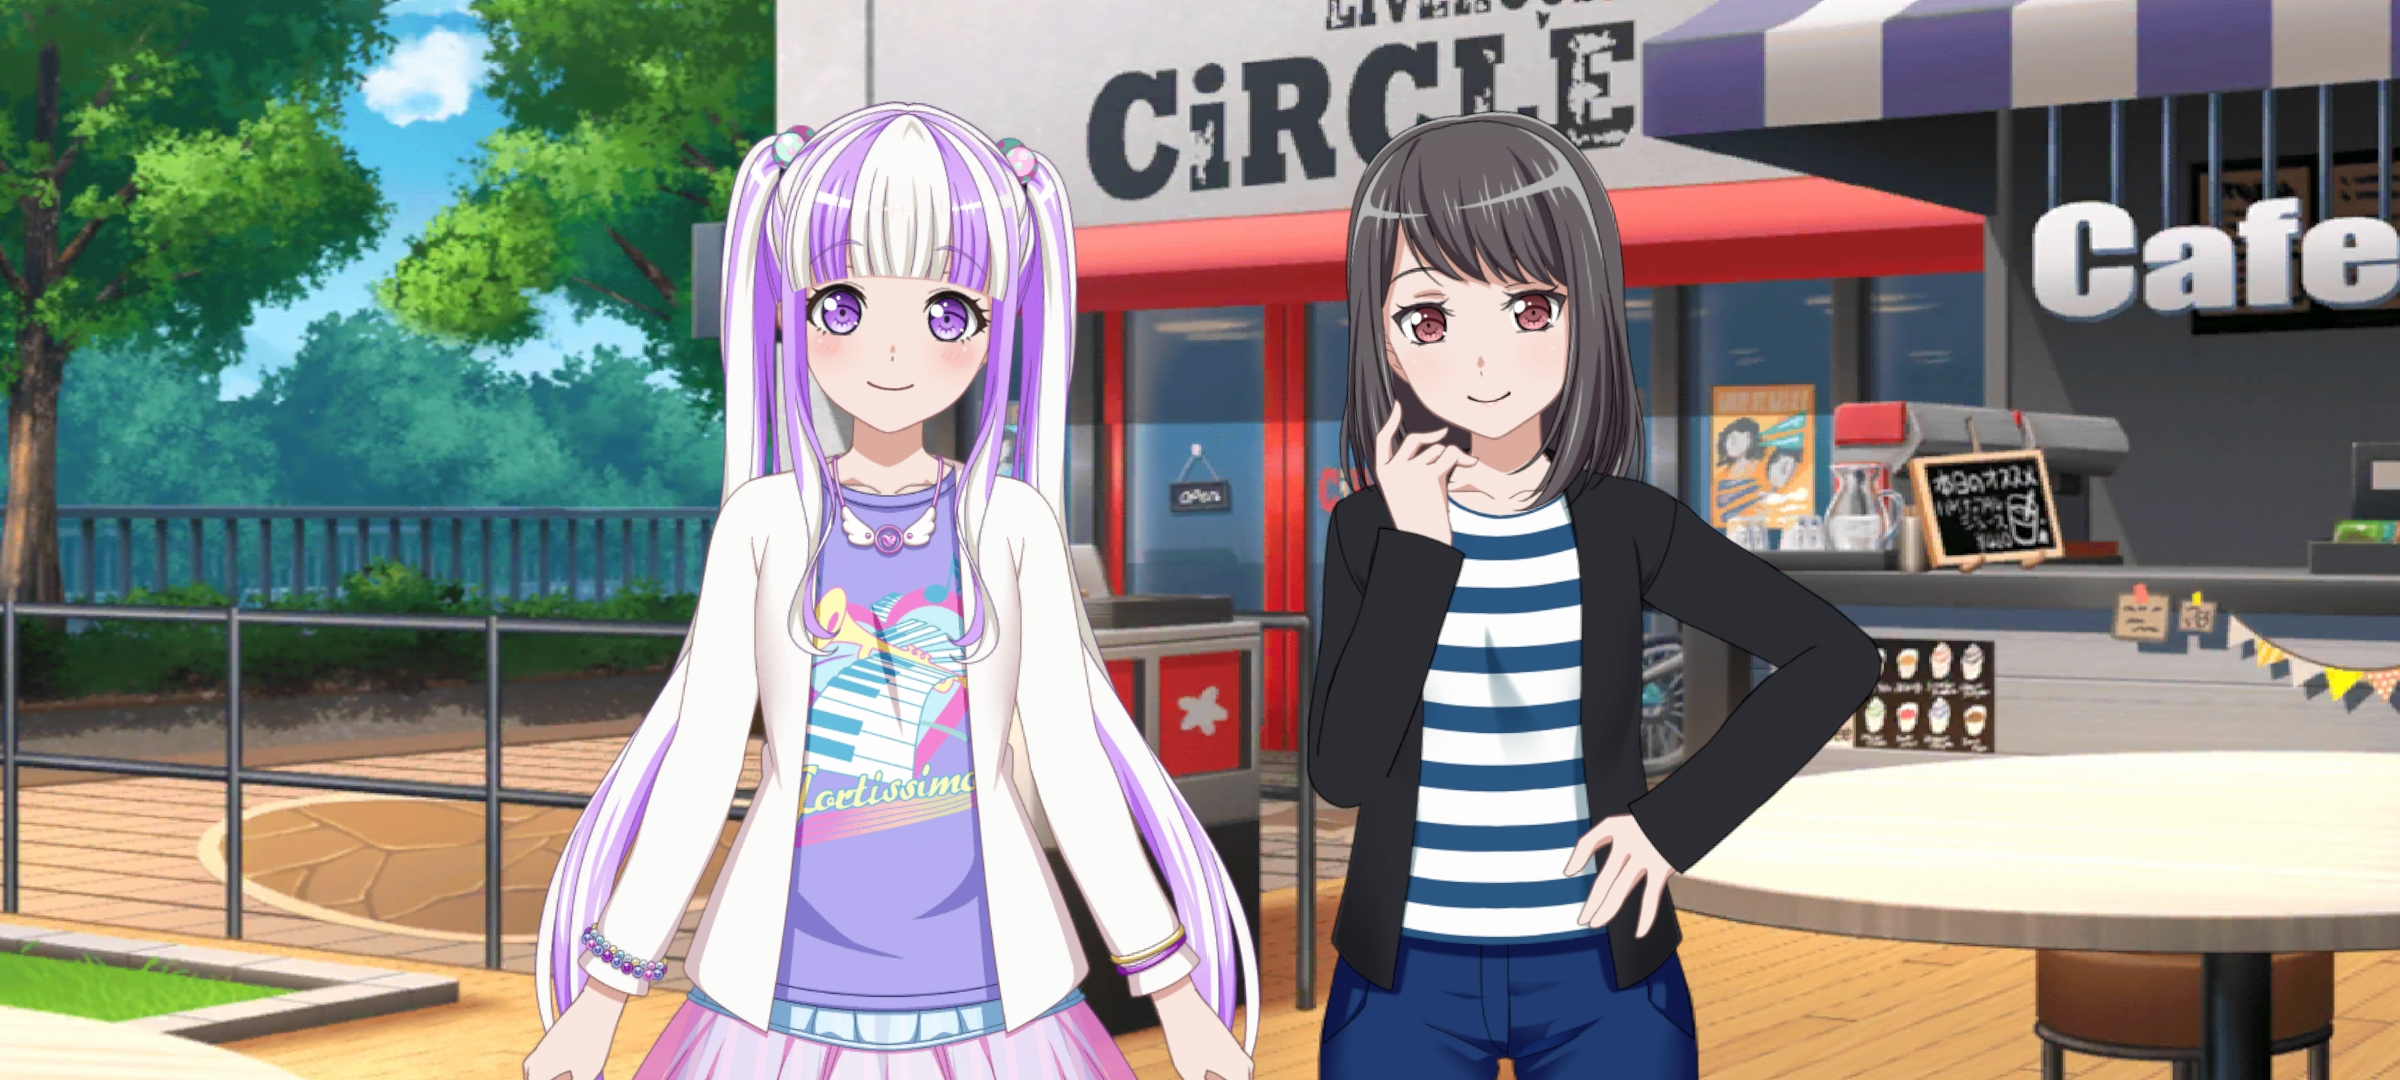 hi everyone !! this is my first post here, i'm new to bandori : i  absolutely love pareo, Feed, Community